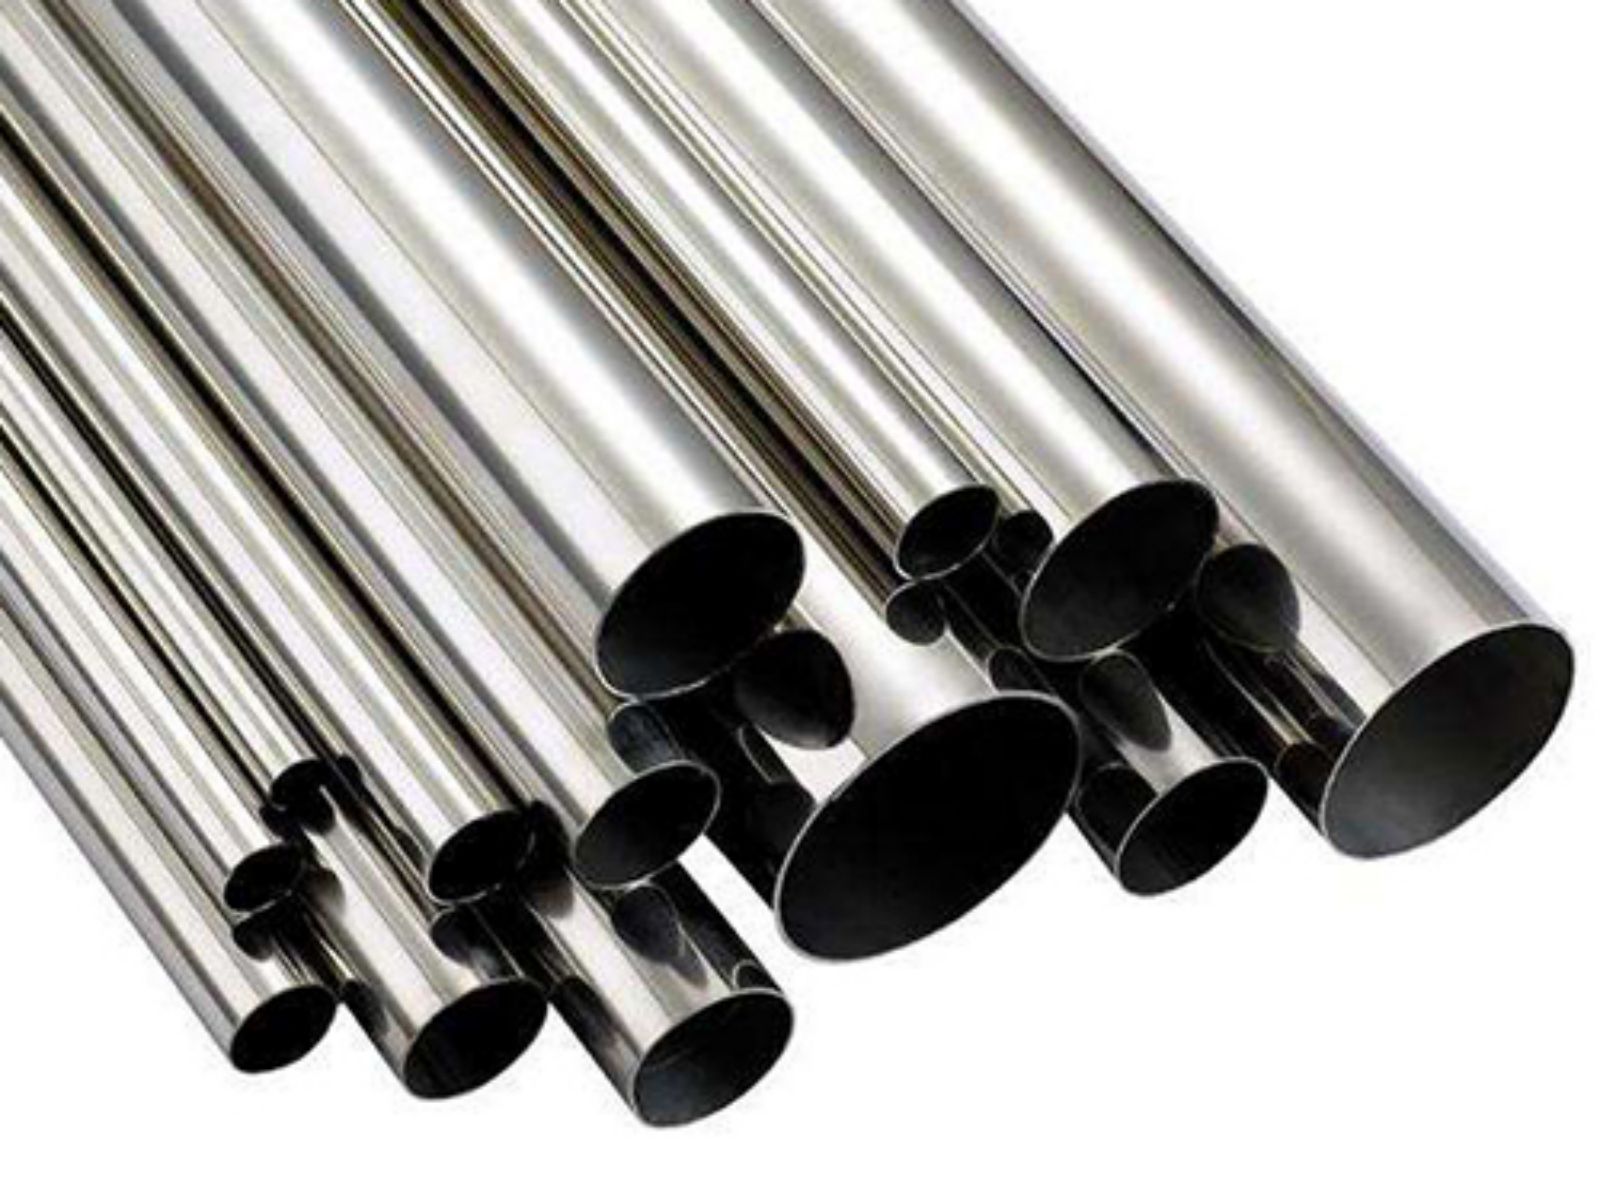 The Development and Application of Titanium Alloy Seamless Pipe